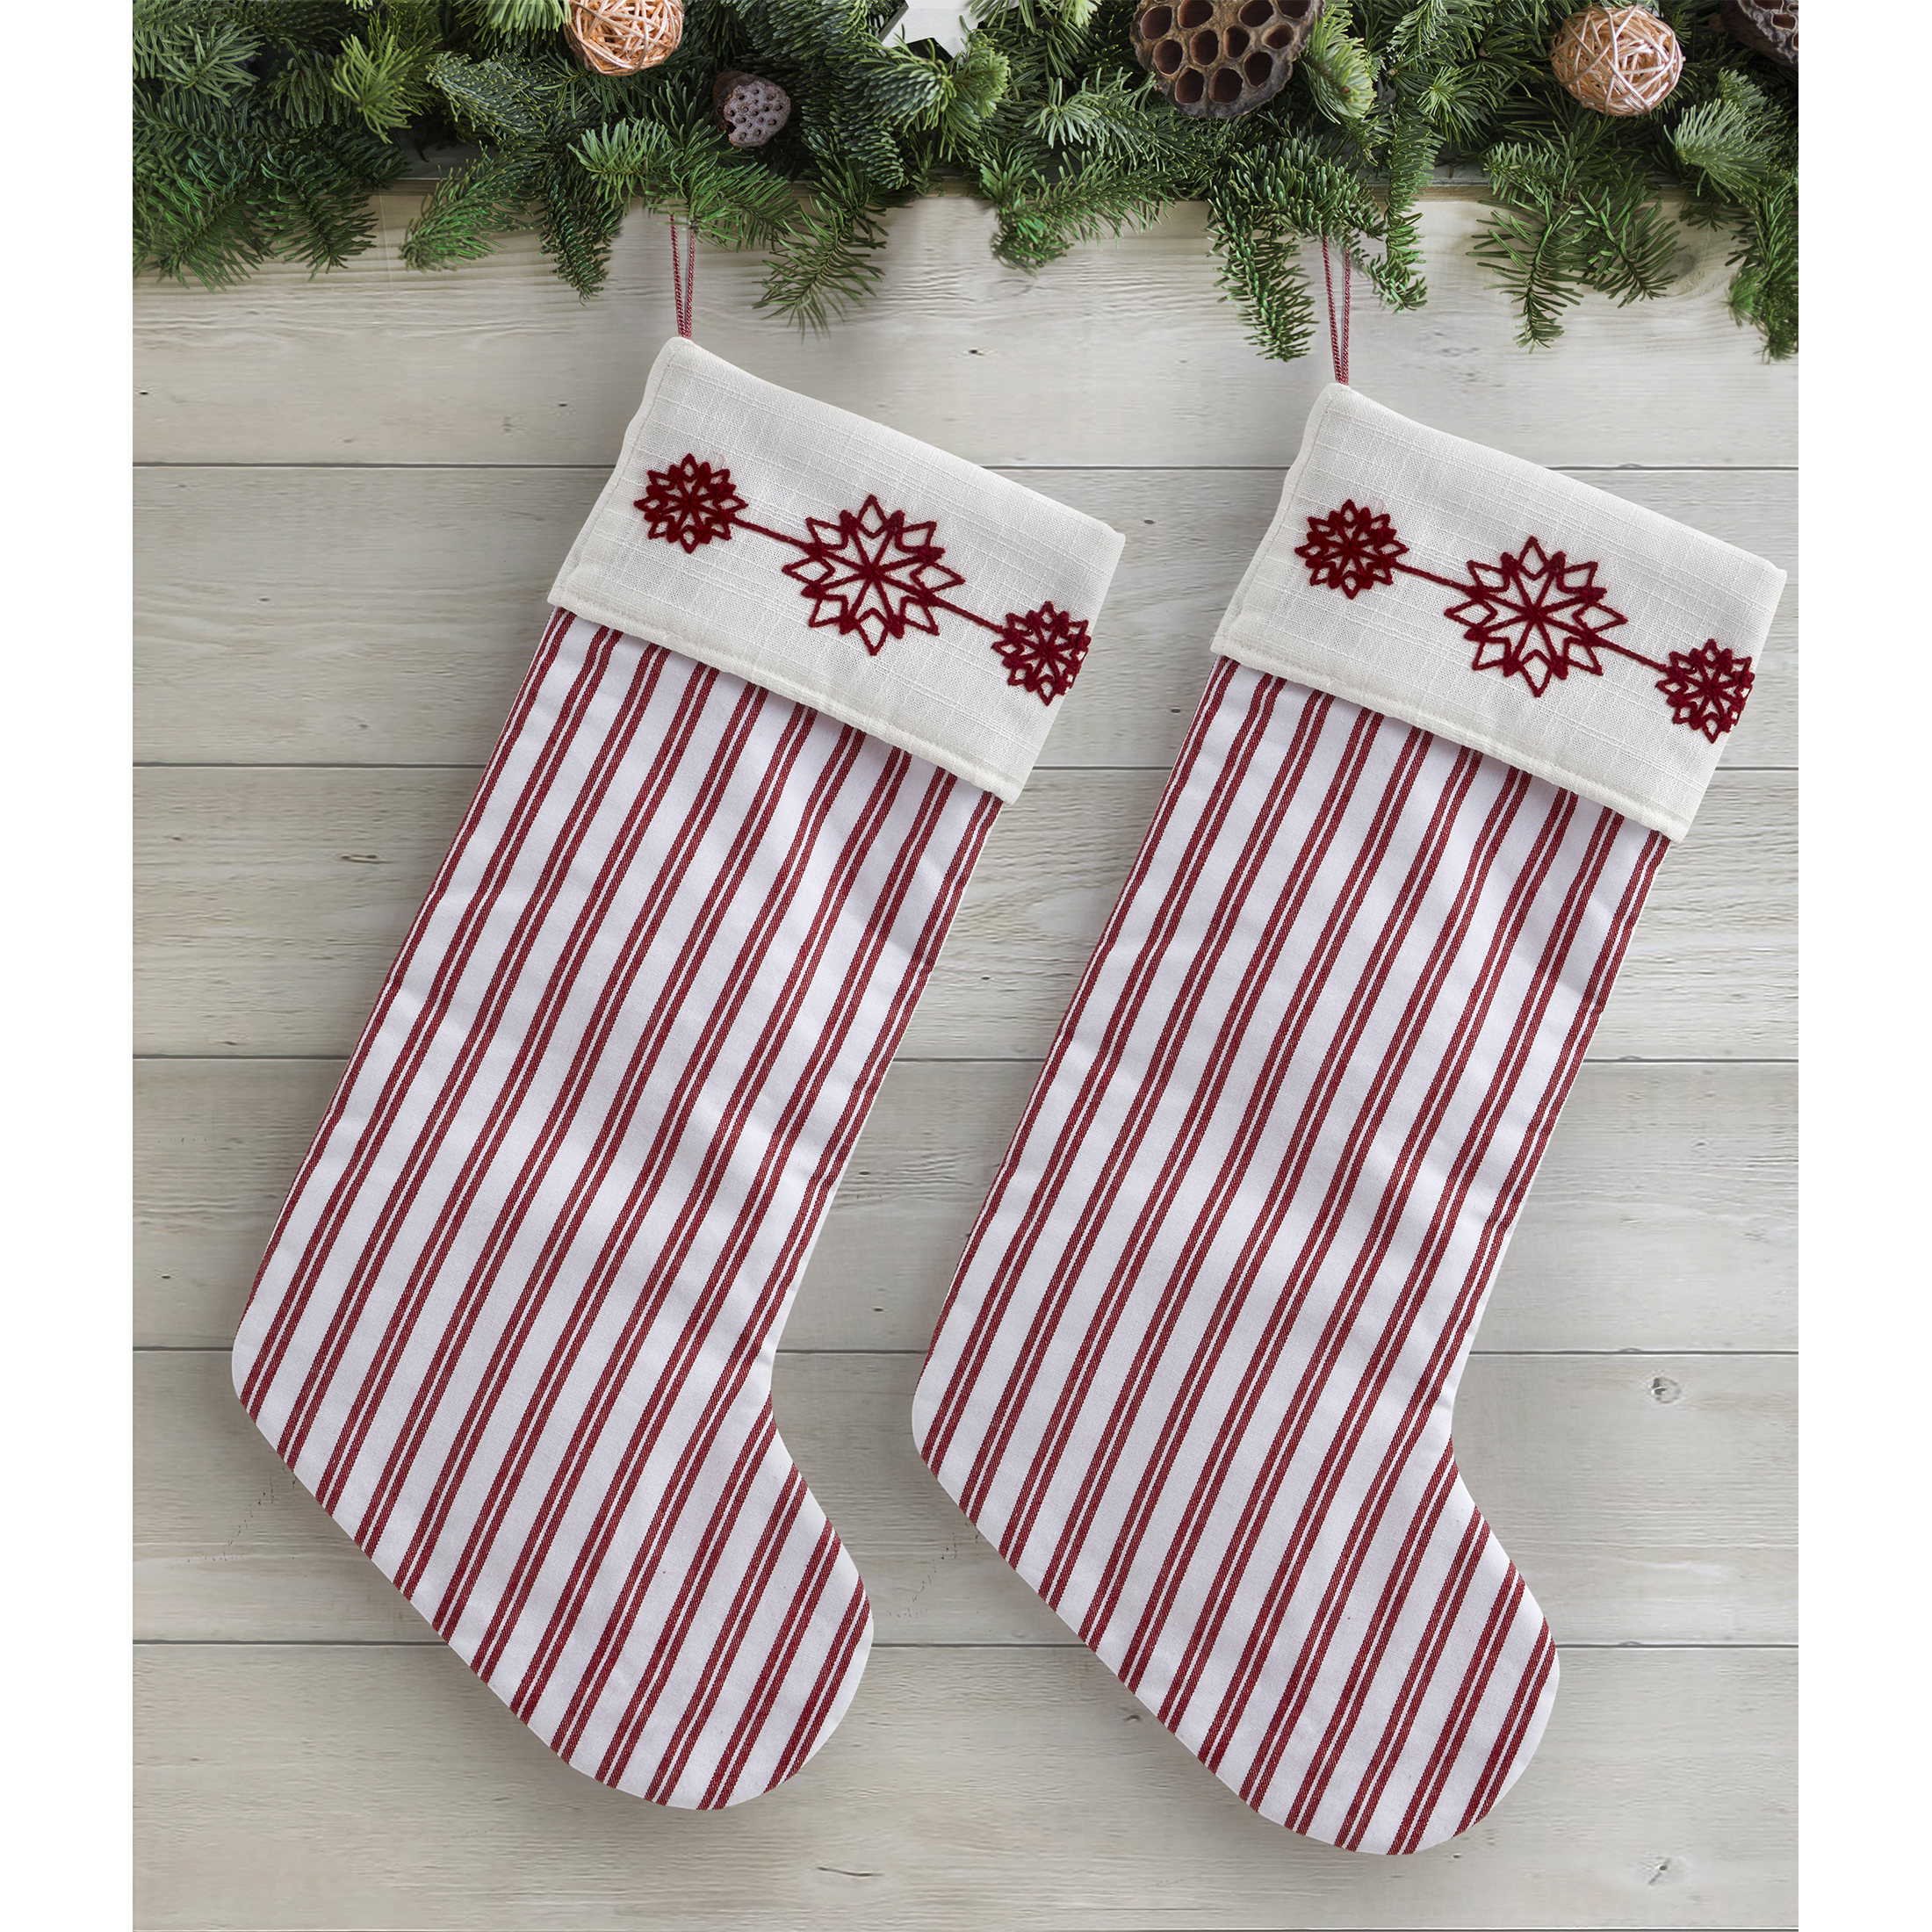 My Texas House Fallon Red Snowflake Christmas Stockings, 21" (2 Count) - image 2 of 6